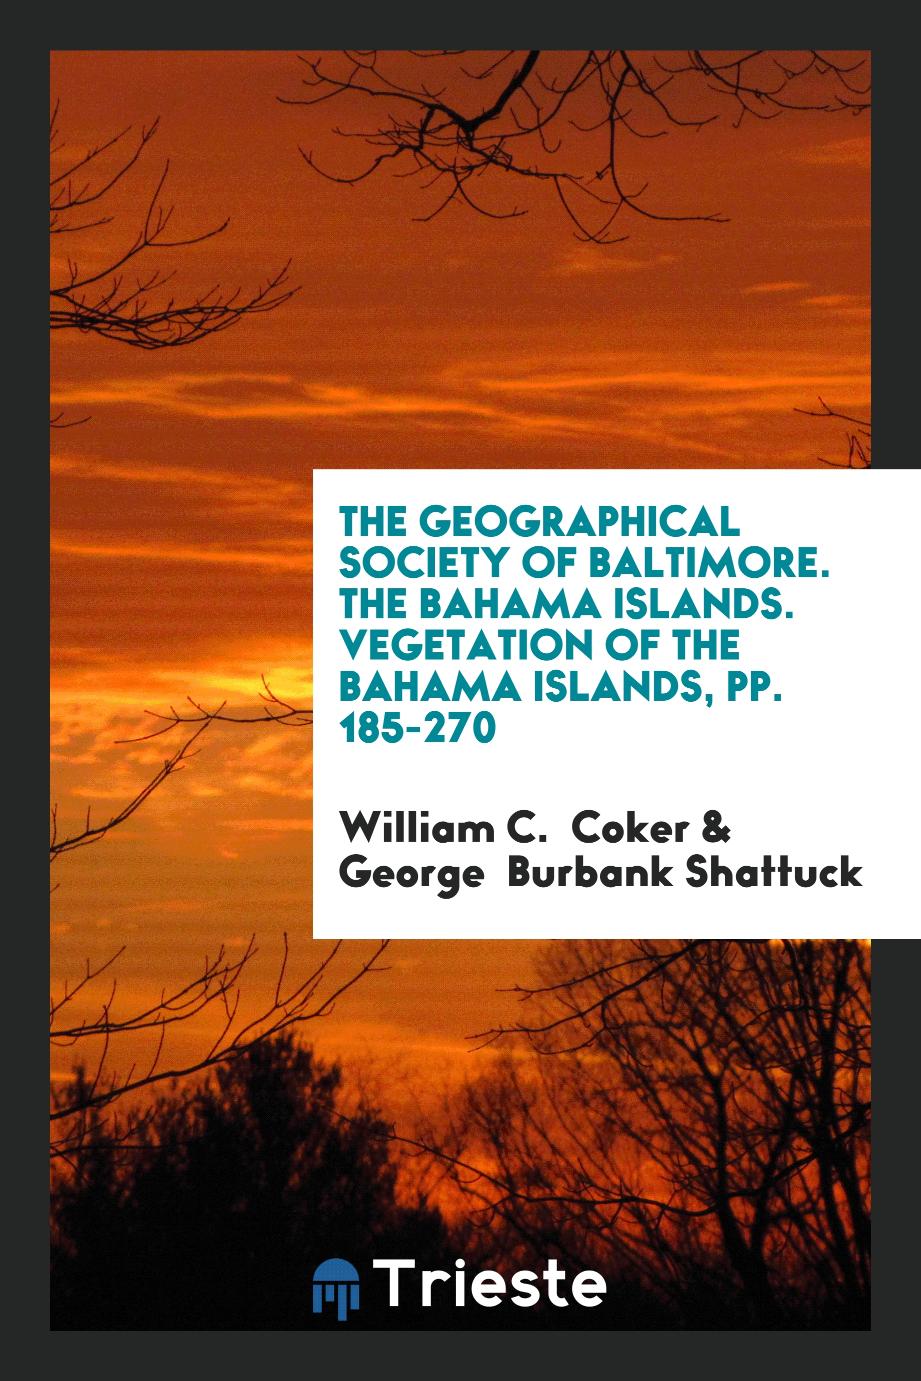 The Geographical Society of Baltimore. The Bahama Islands. Vegetation of the Bahama Islands, pp. 185-270